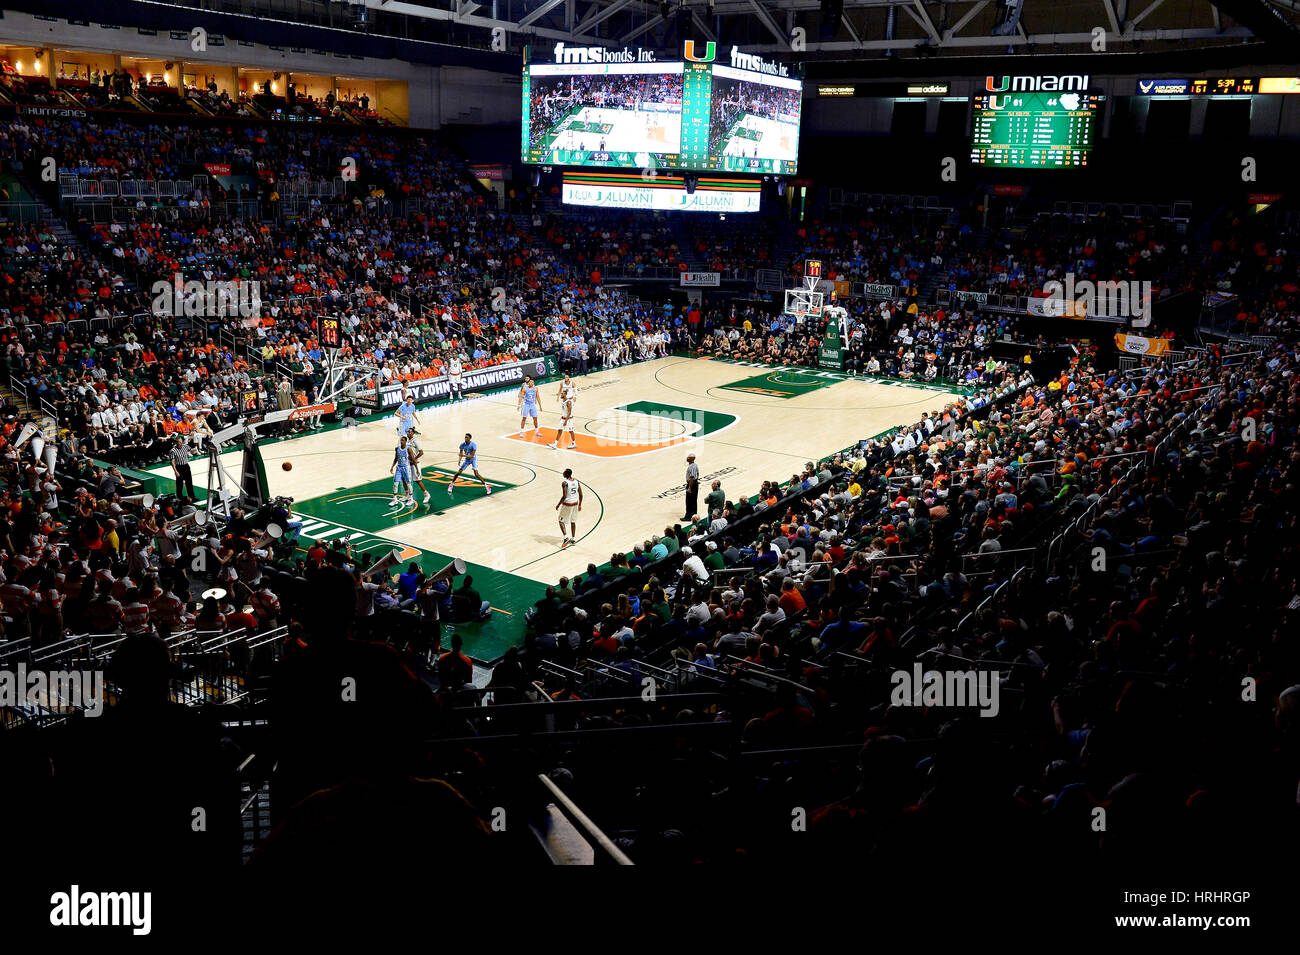 General view of the court during an ACC basketball game between the University of Miami Hurricanes and North Carolina Tar Heels at the Watsco Center in Coral Gables, Florida